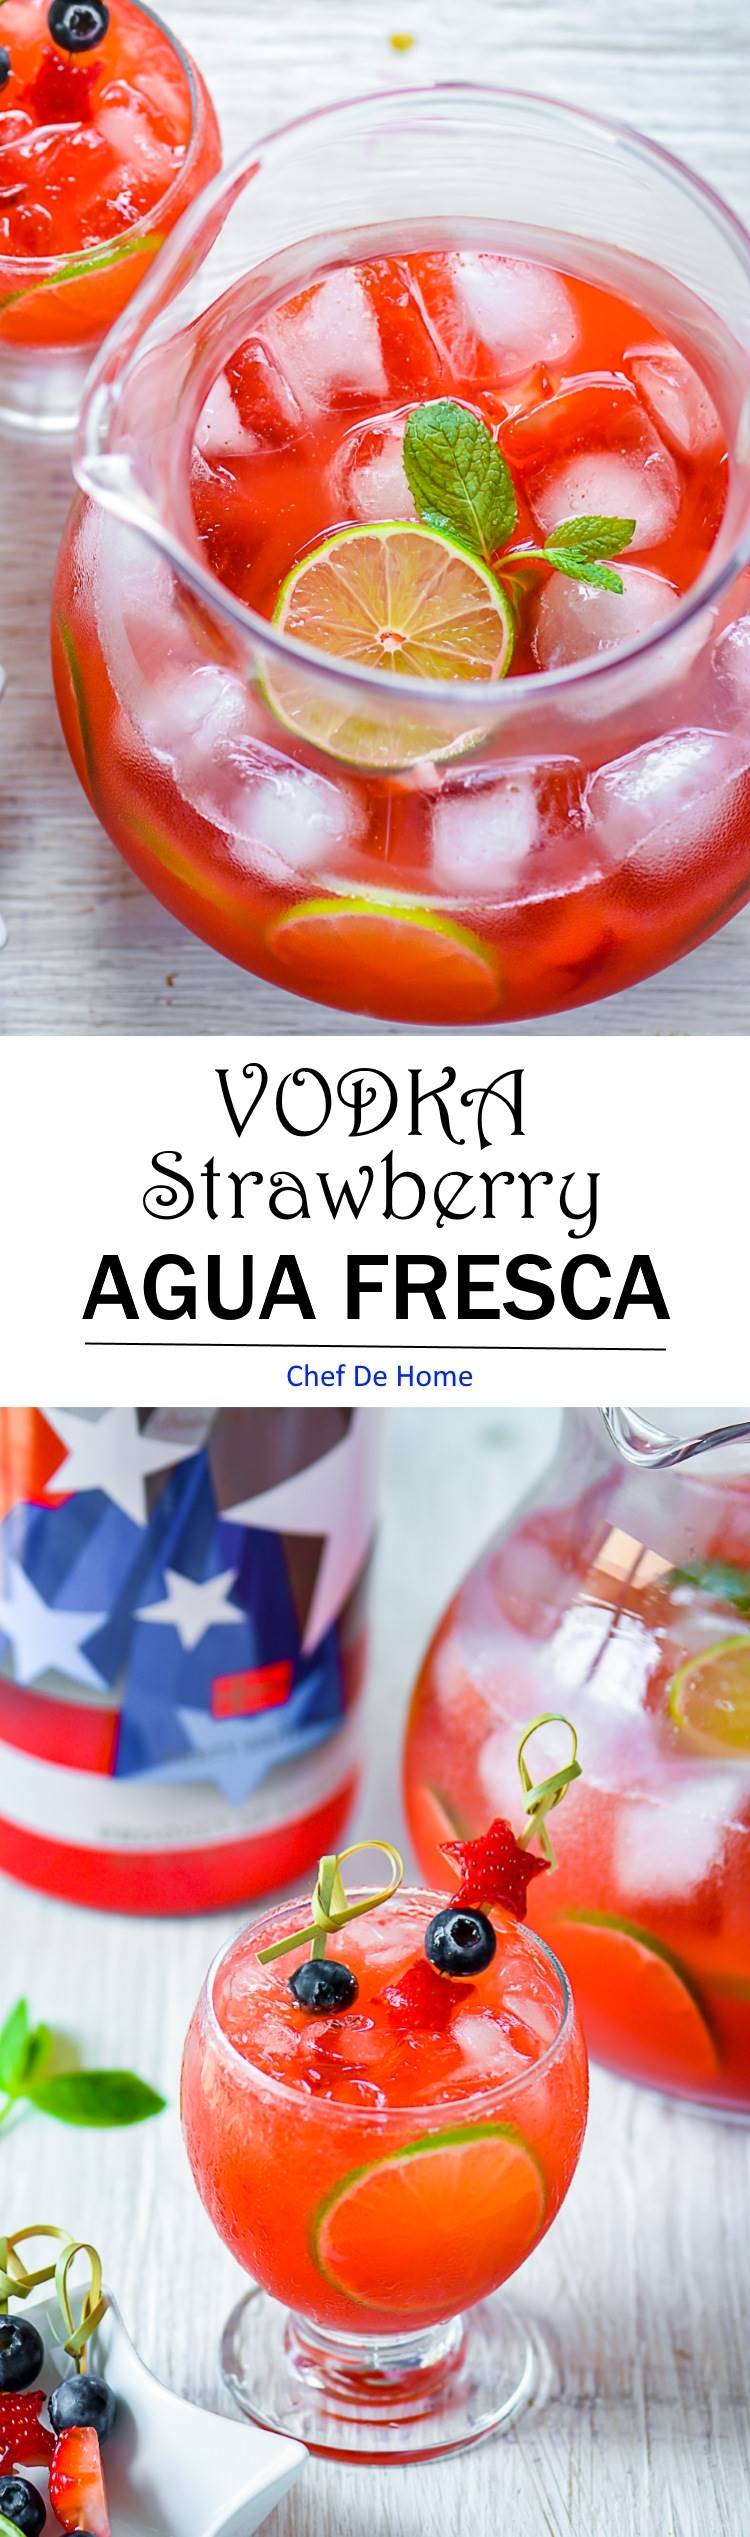 Pitcher filled of party style refreshing Strawberry Agua Fresca cocktail for 4th July Red White and Blue Theme Party Made with all natural fresh ingredients | chefdehome.com